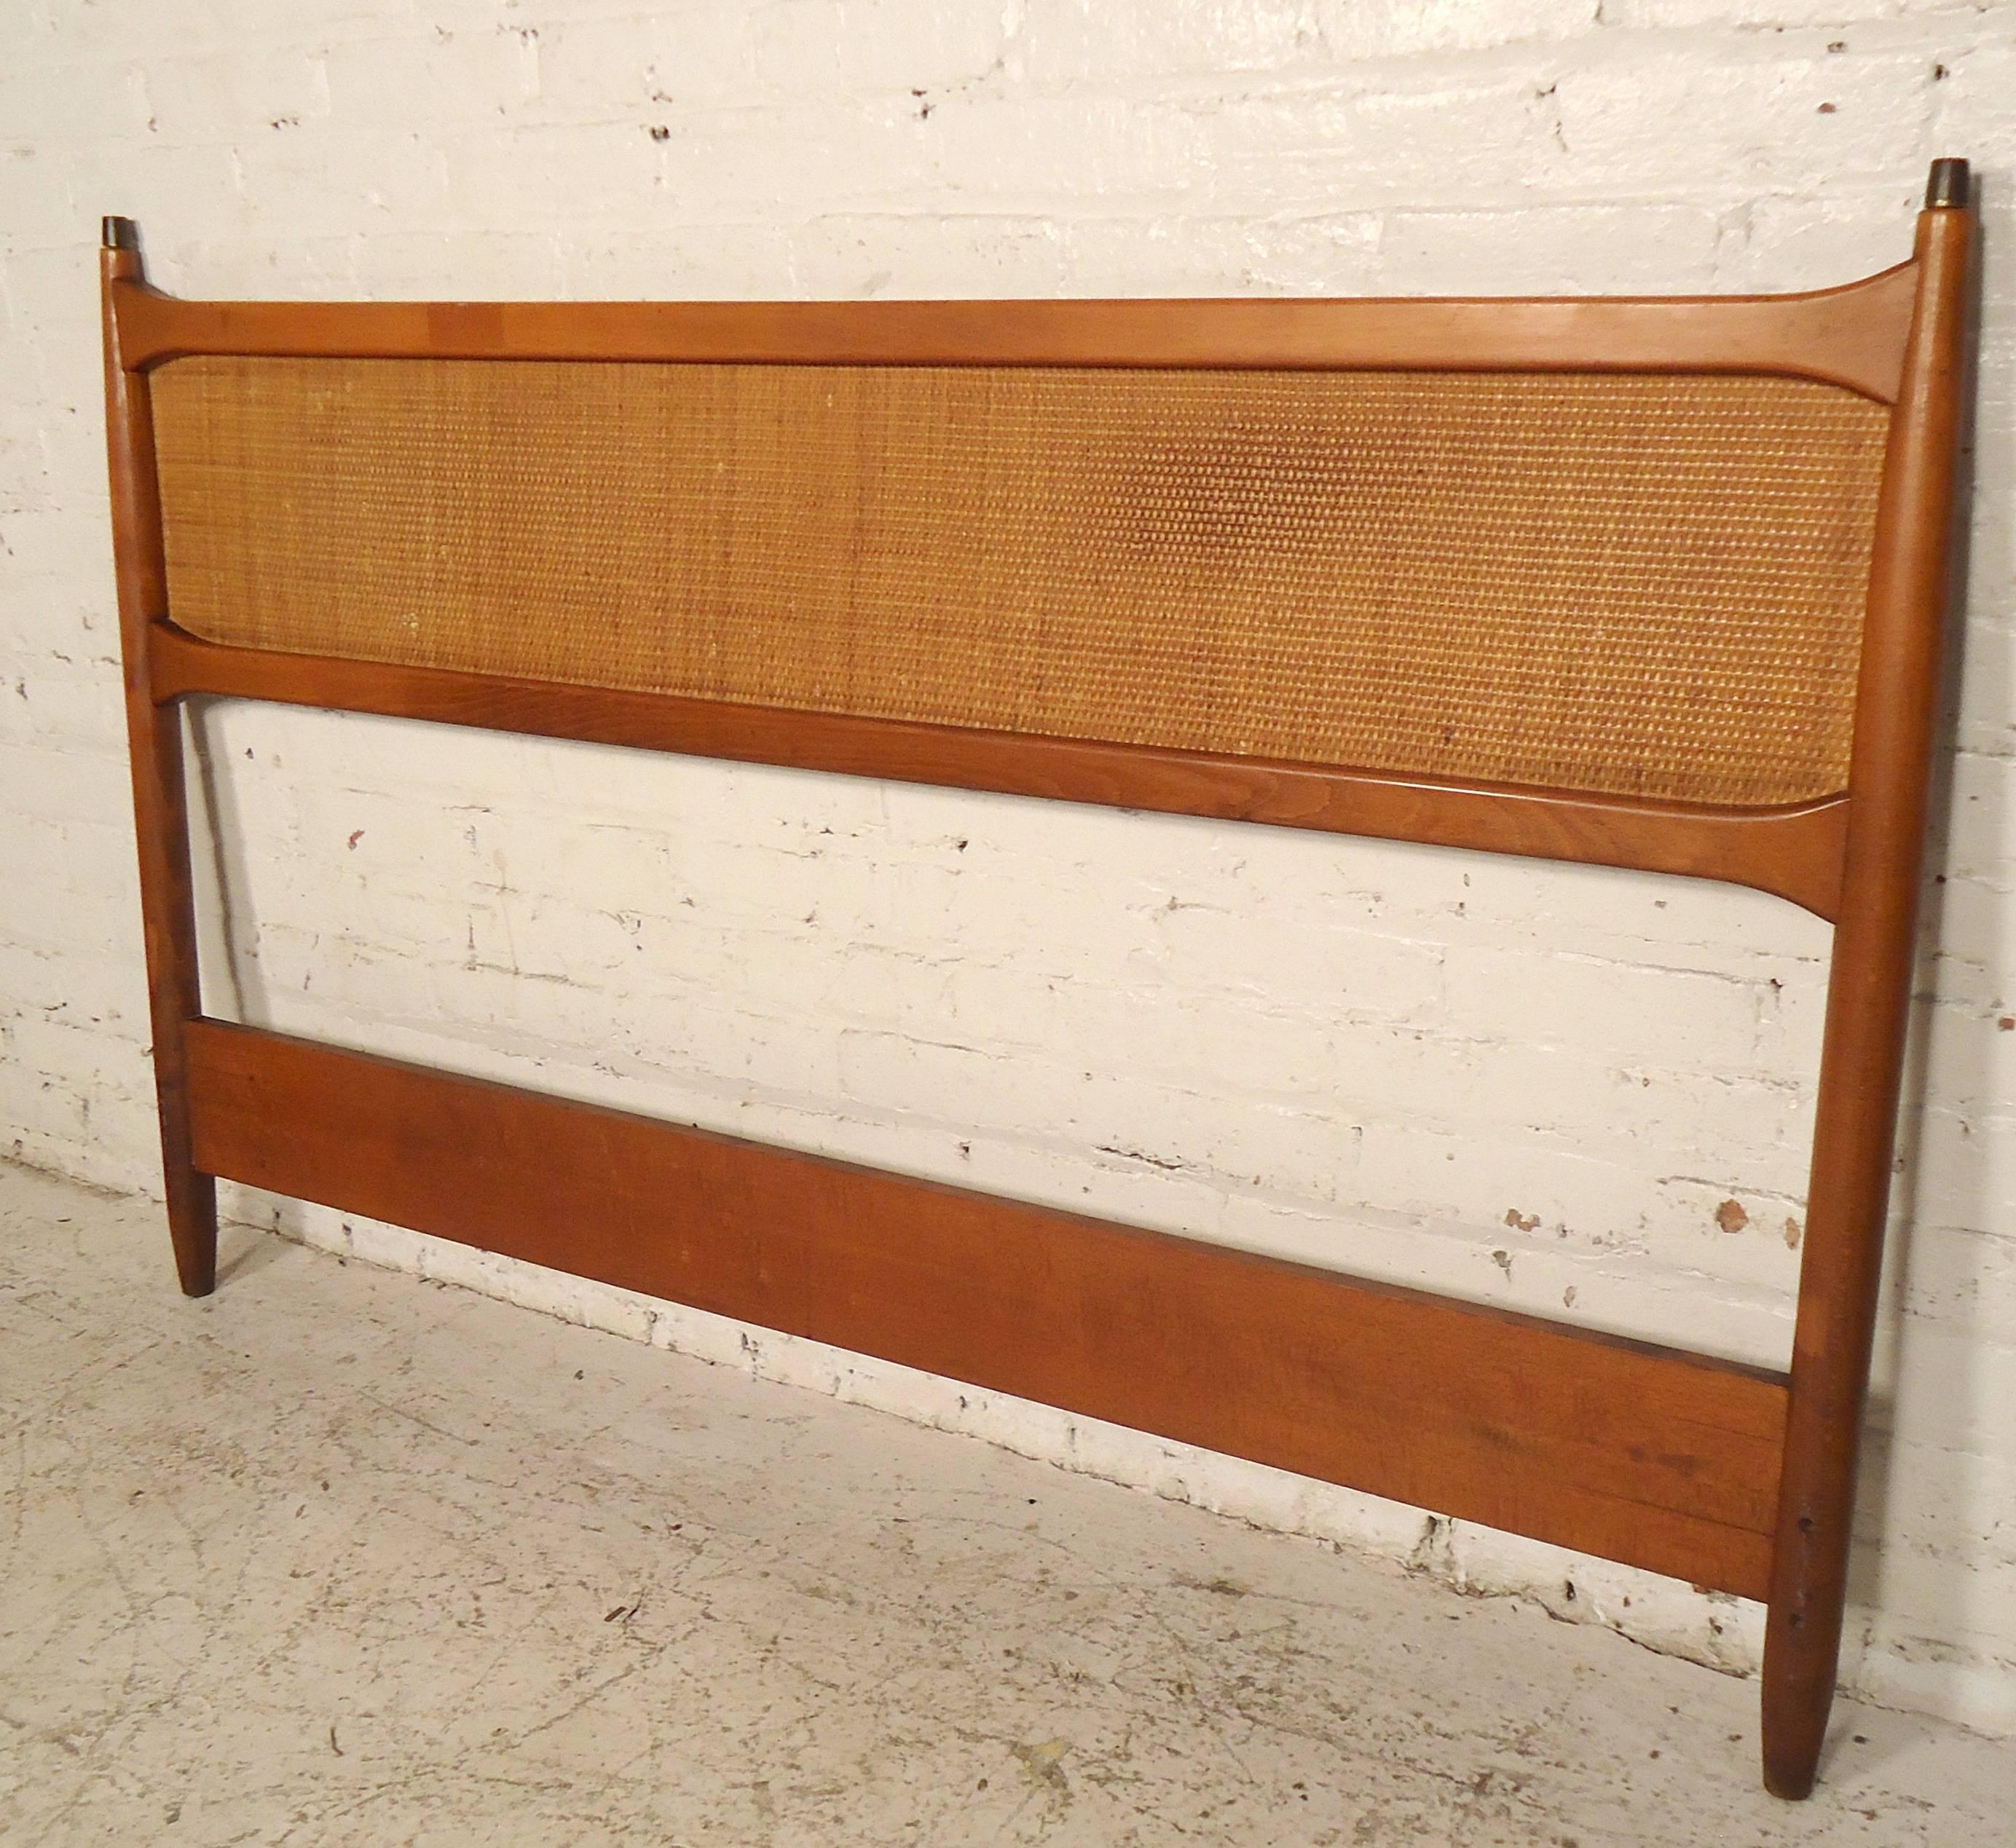 Attractive headboard with cane insert and brass tips. A handsome backboard to a full size bed.

(Please confirm item location - NY or NJ - with dealer).
    